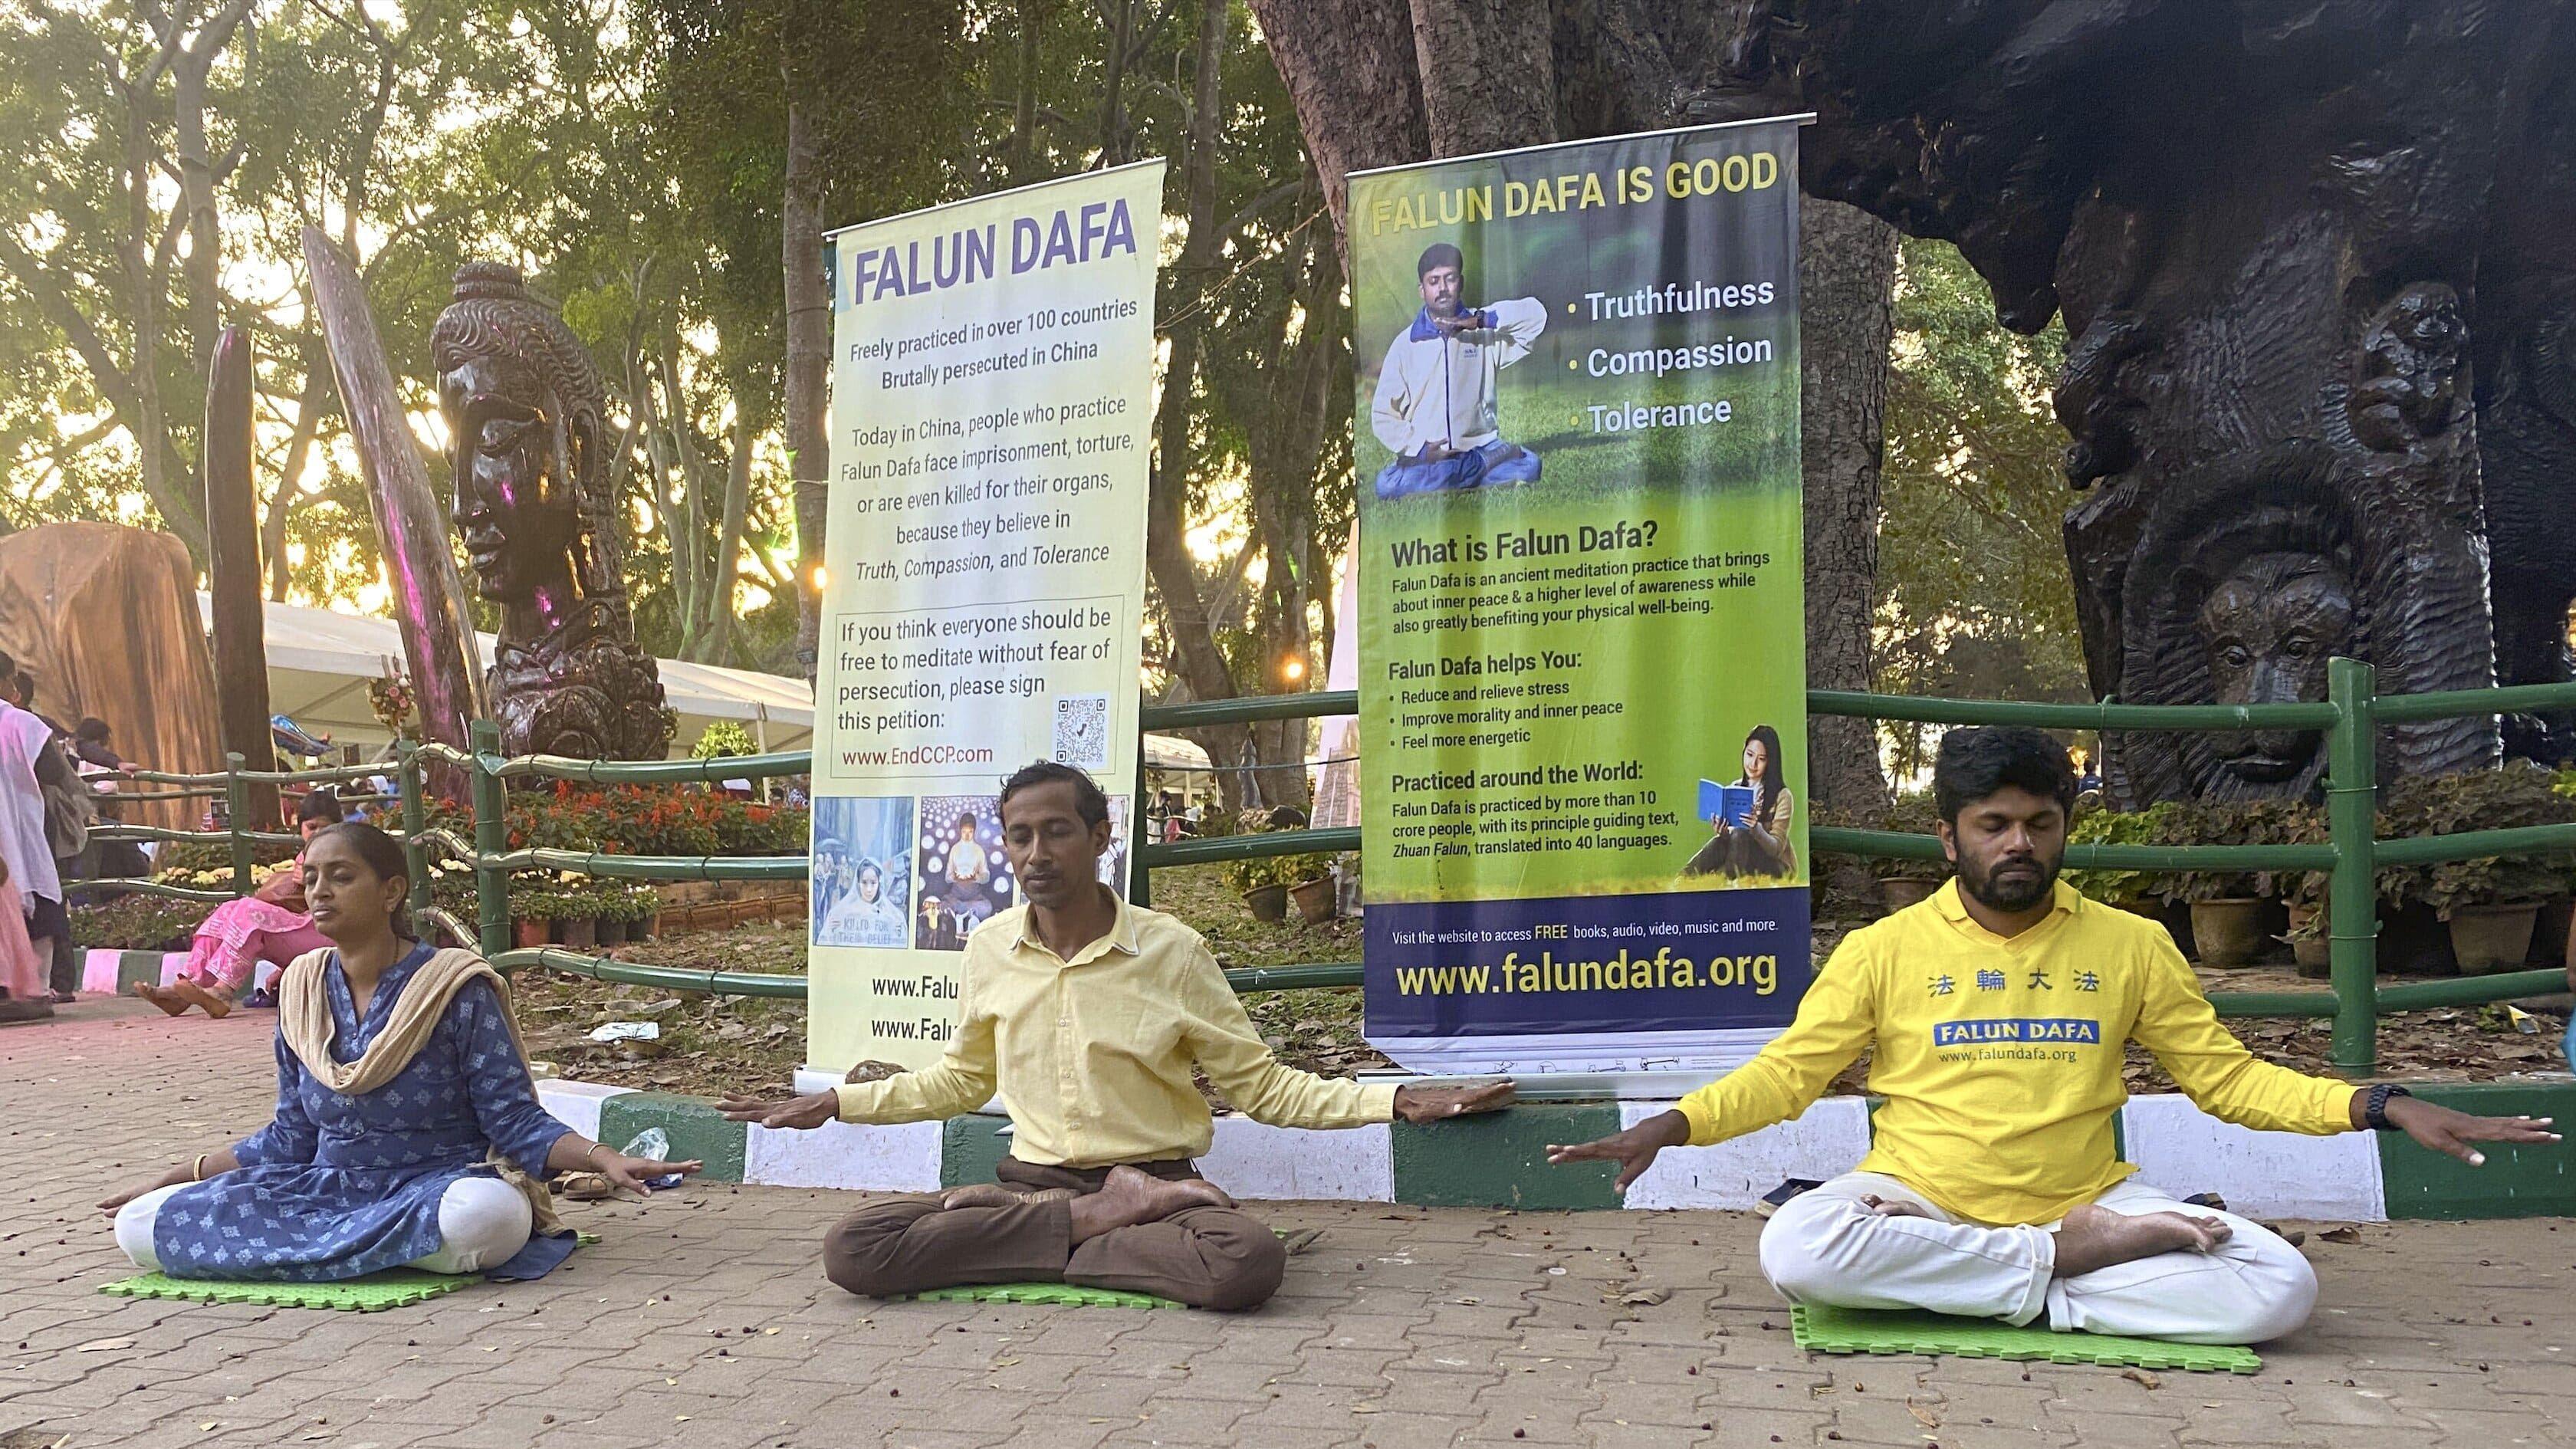 Falun Gong practitioners in Bangalore meditate and offer instruction to passerby at the 213th annual flower show.